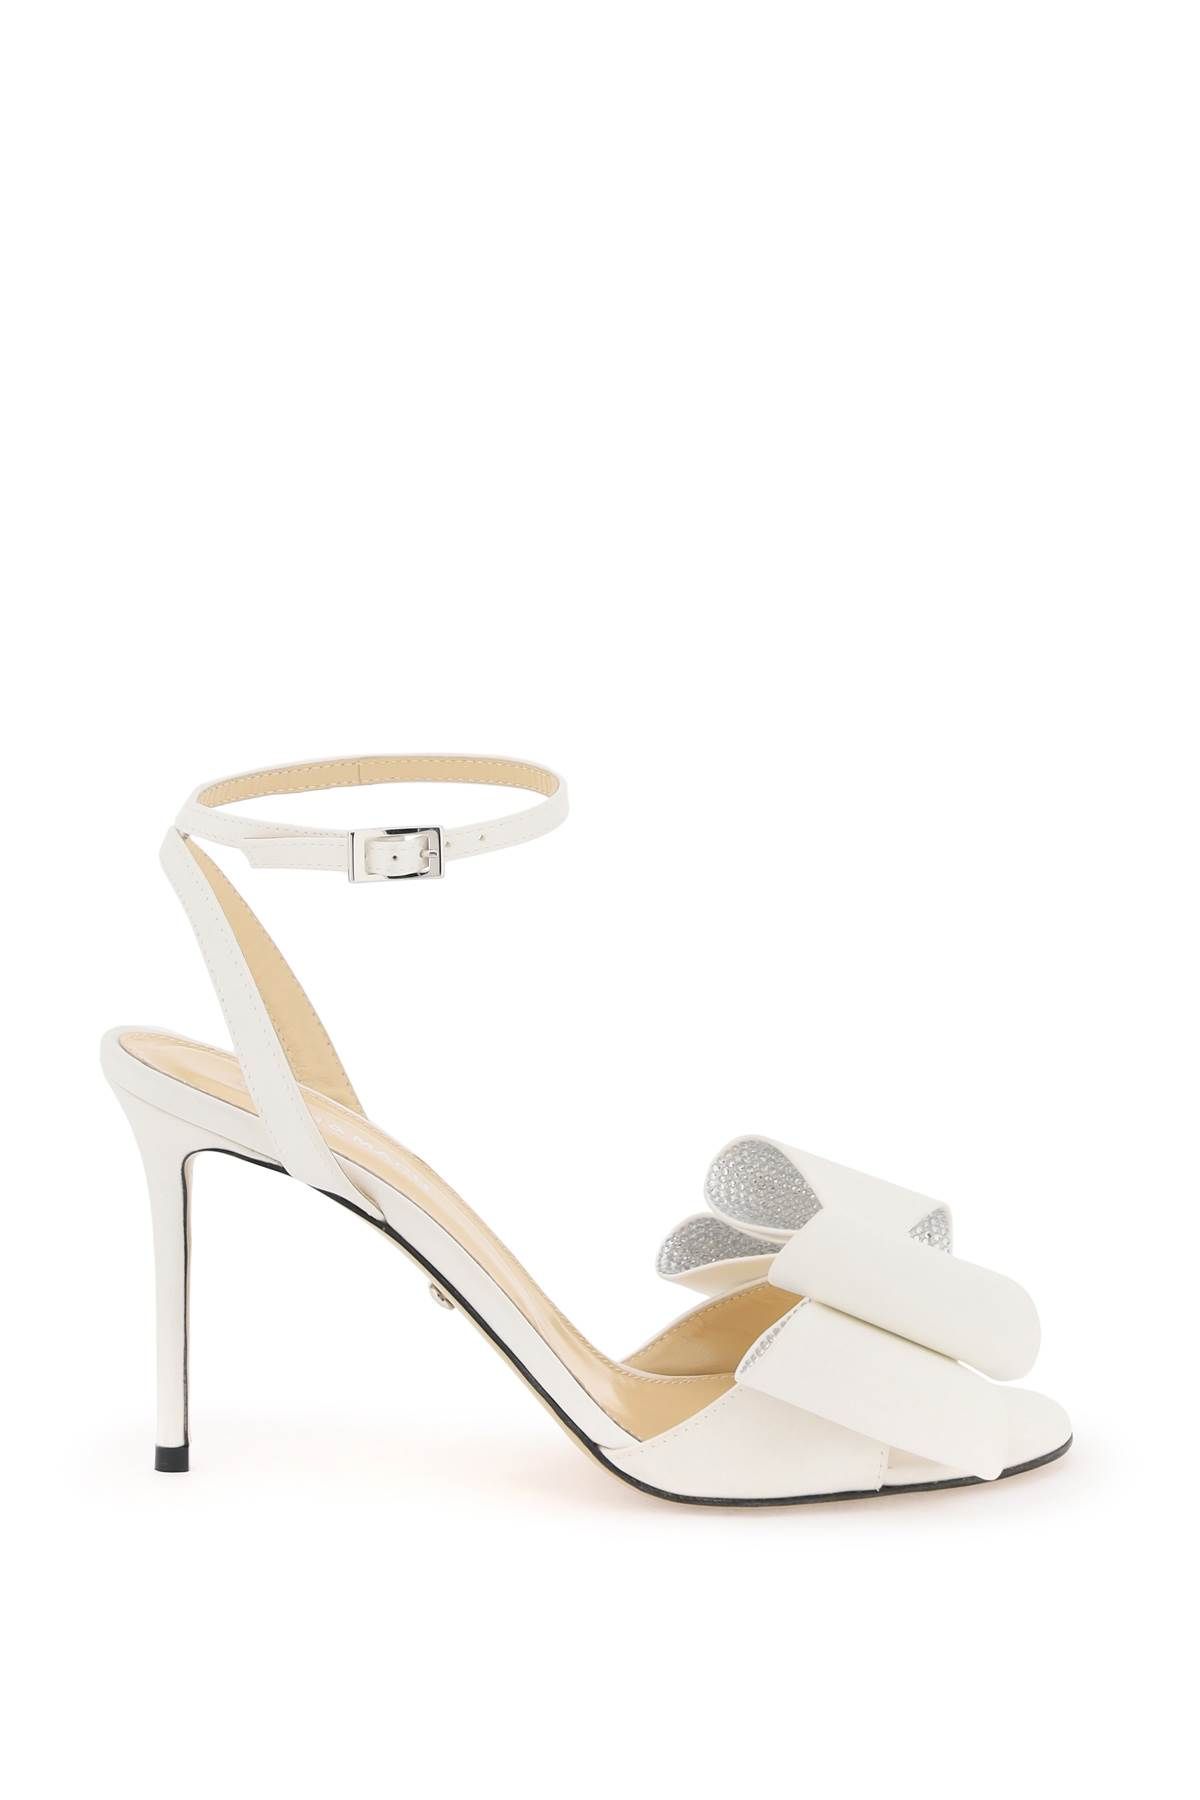 Mach & Mach Satin Le Cadeau Sandals With Double Bow In White